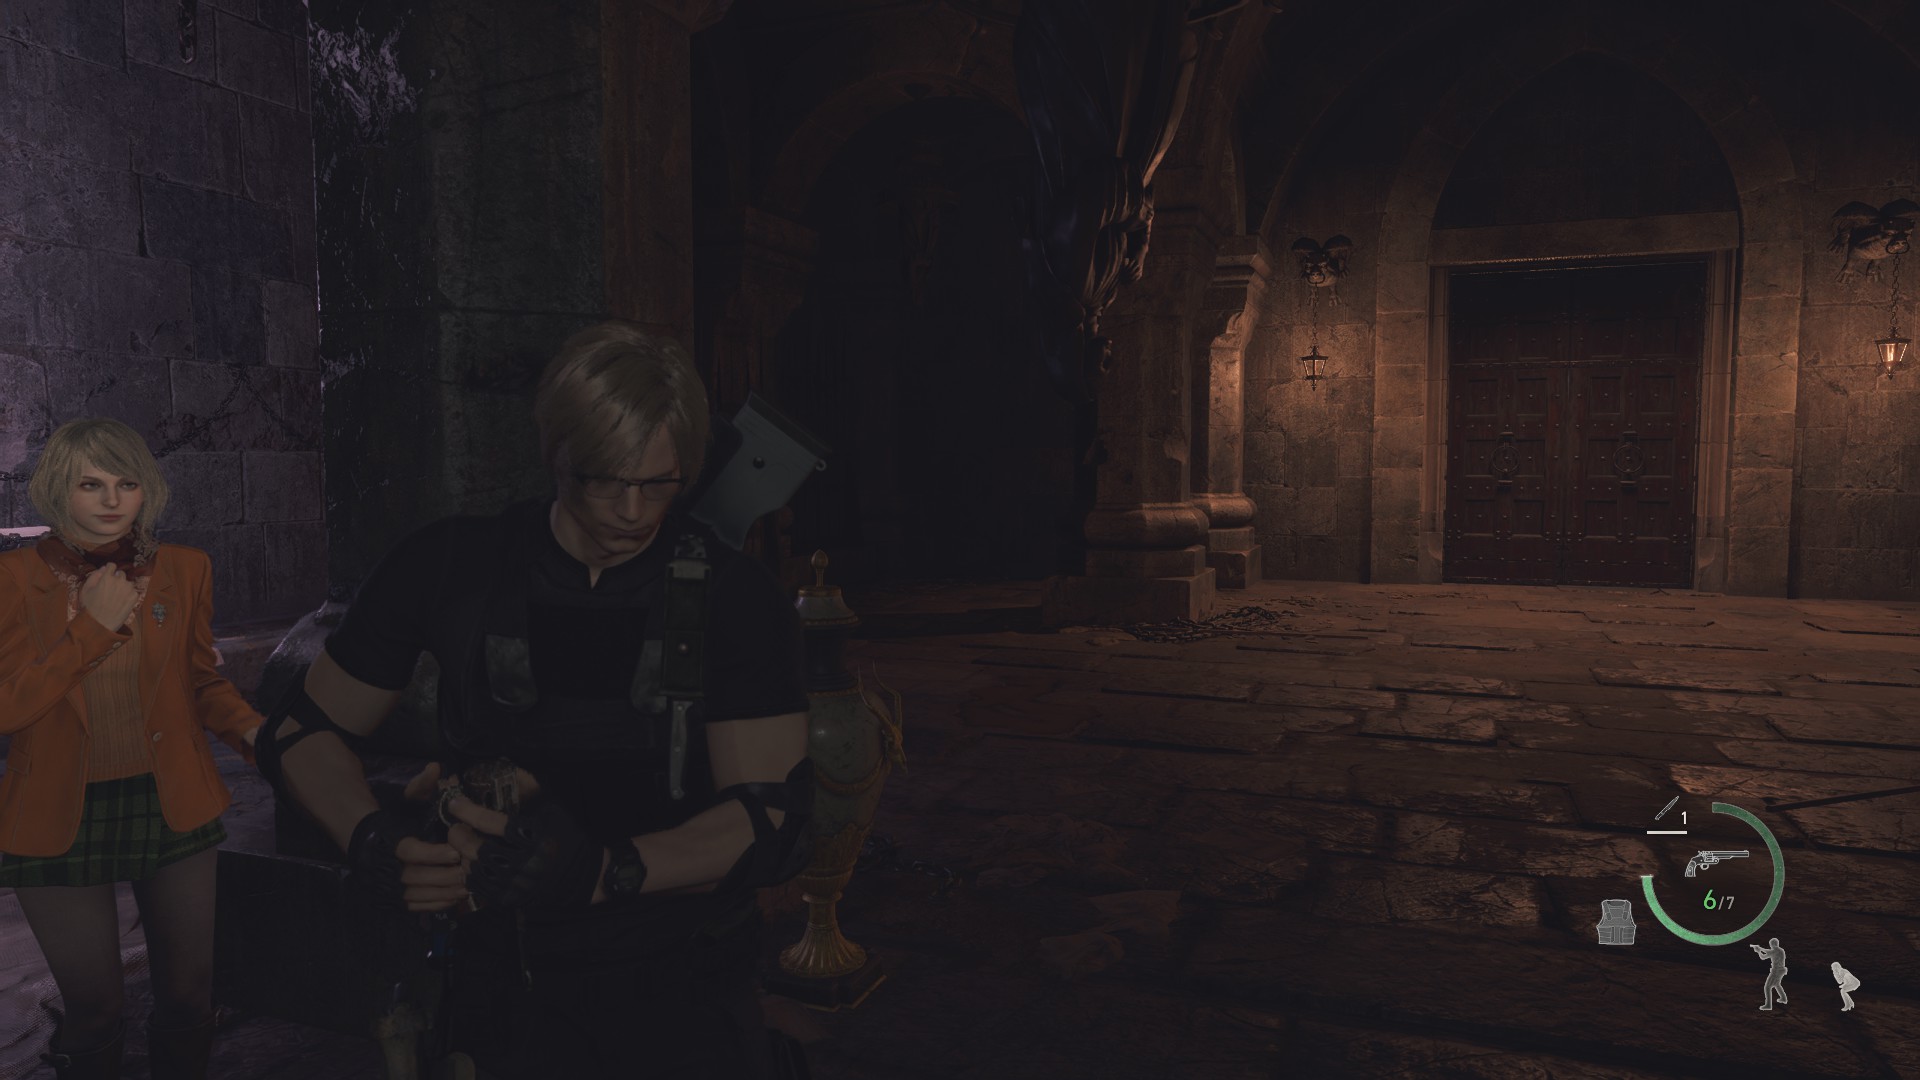 Broken Butterfly's reload animation in Resident Evil 4 pales in comparison to the original